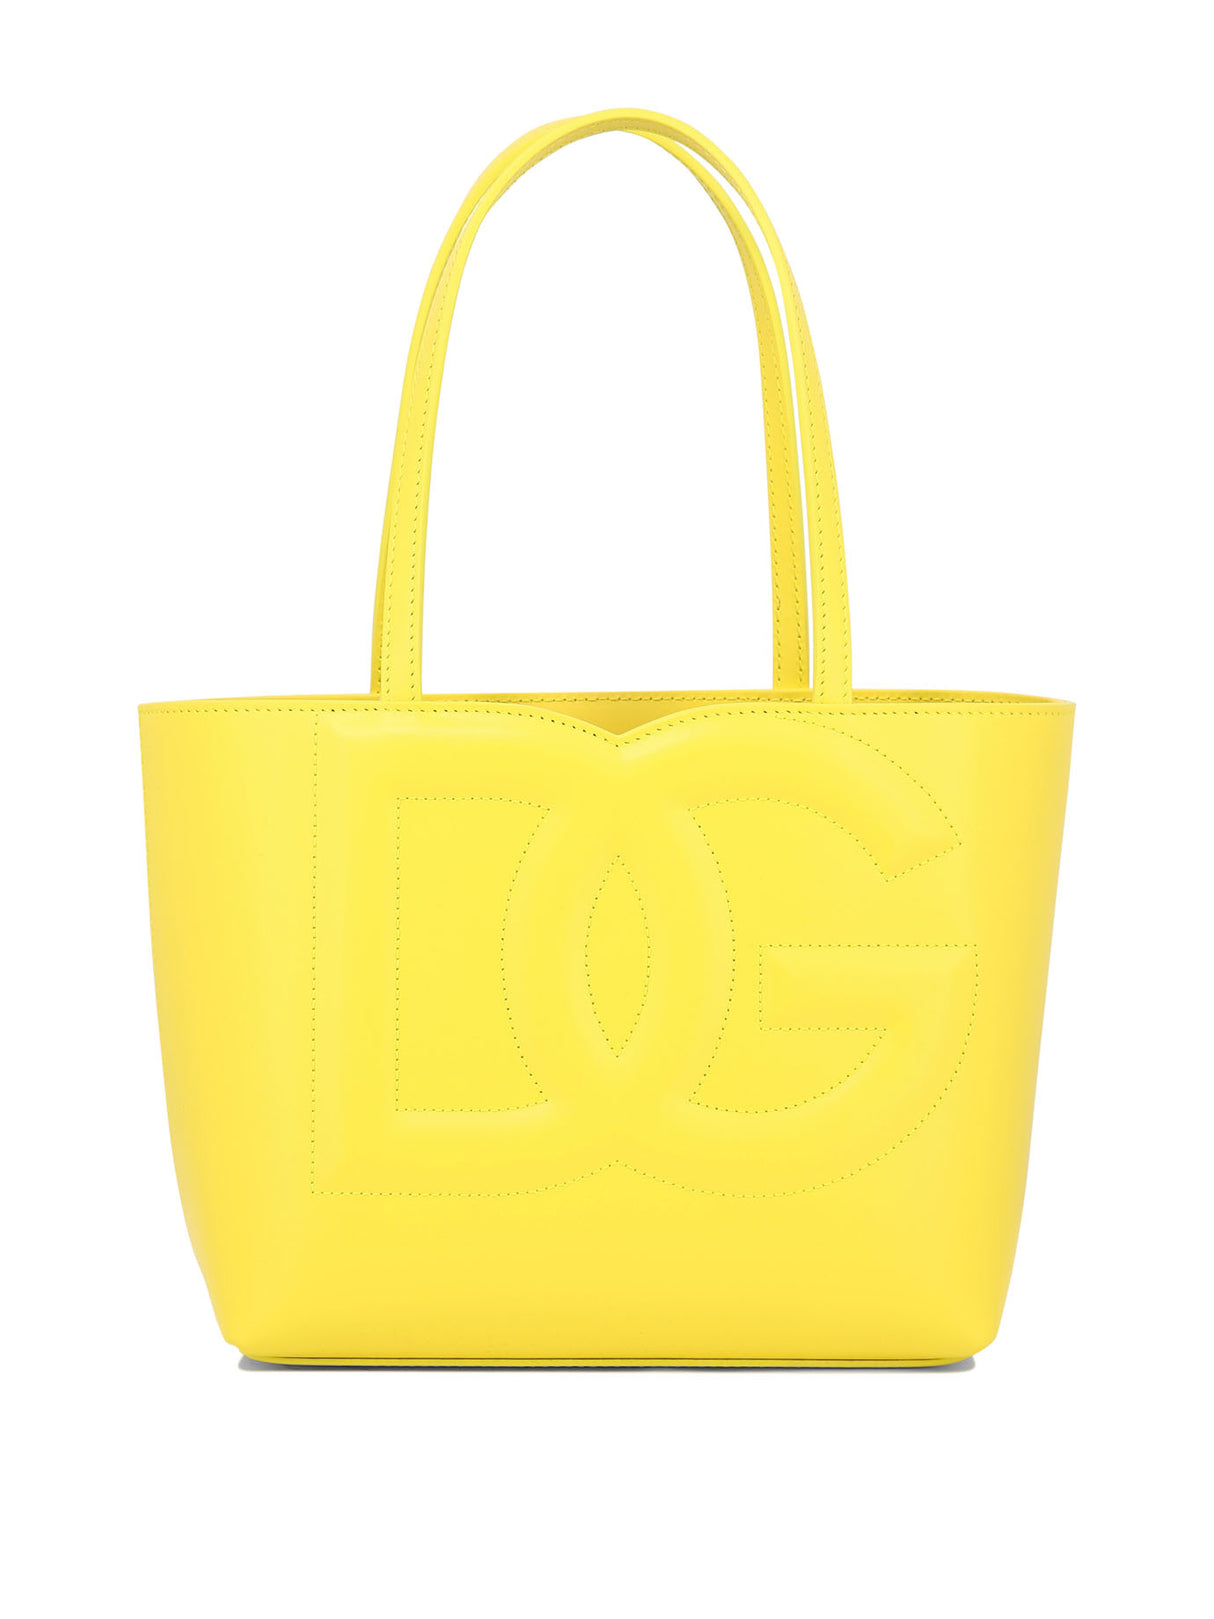 DOLCE & GABBANA Yellow Leather Shoulder Bag for Women - SS24 Collection